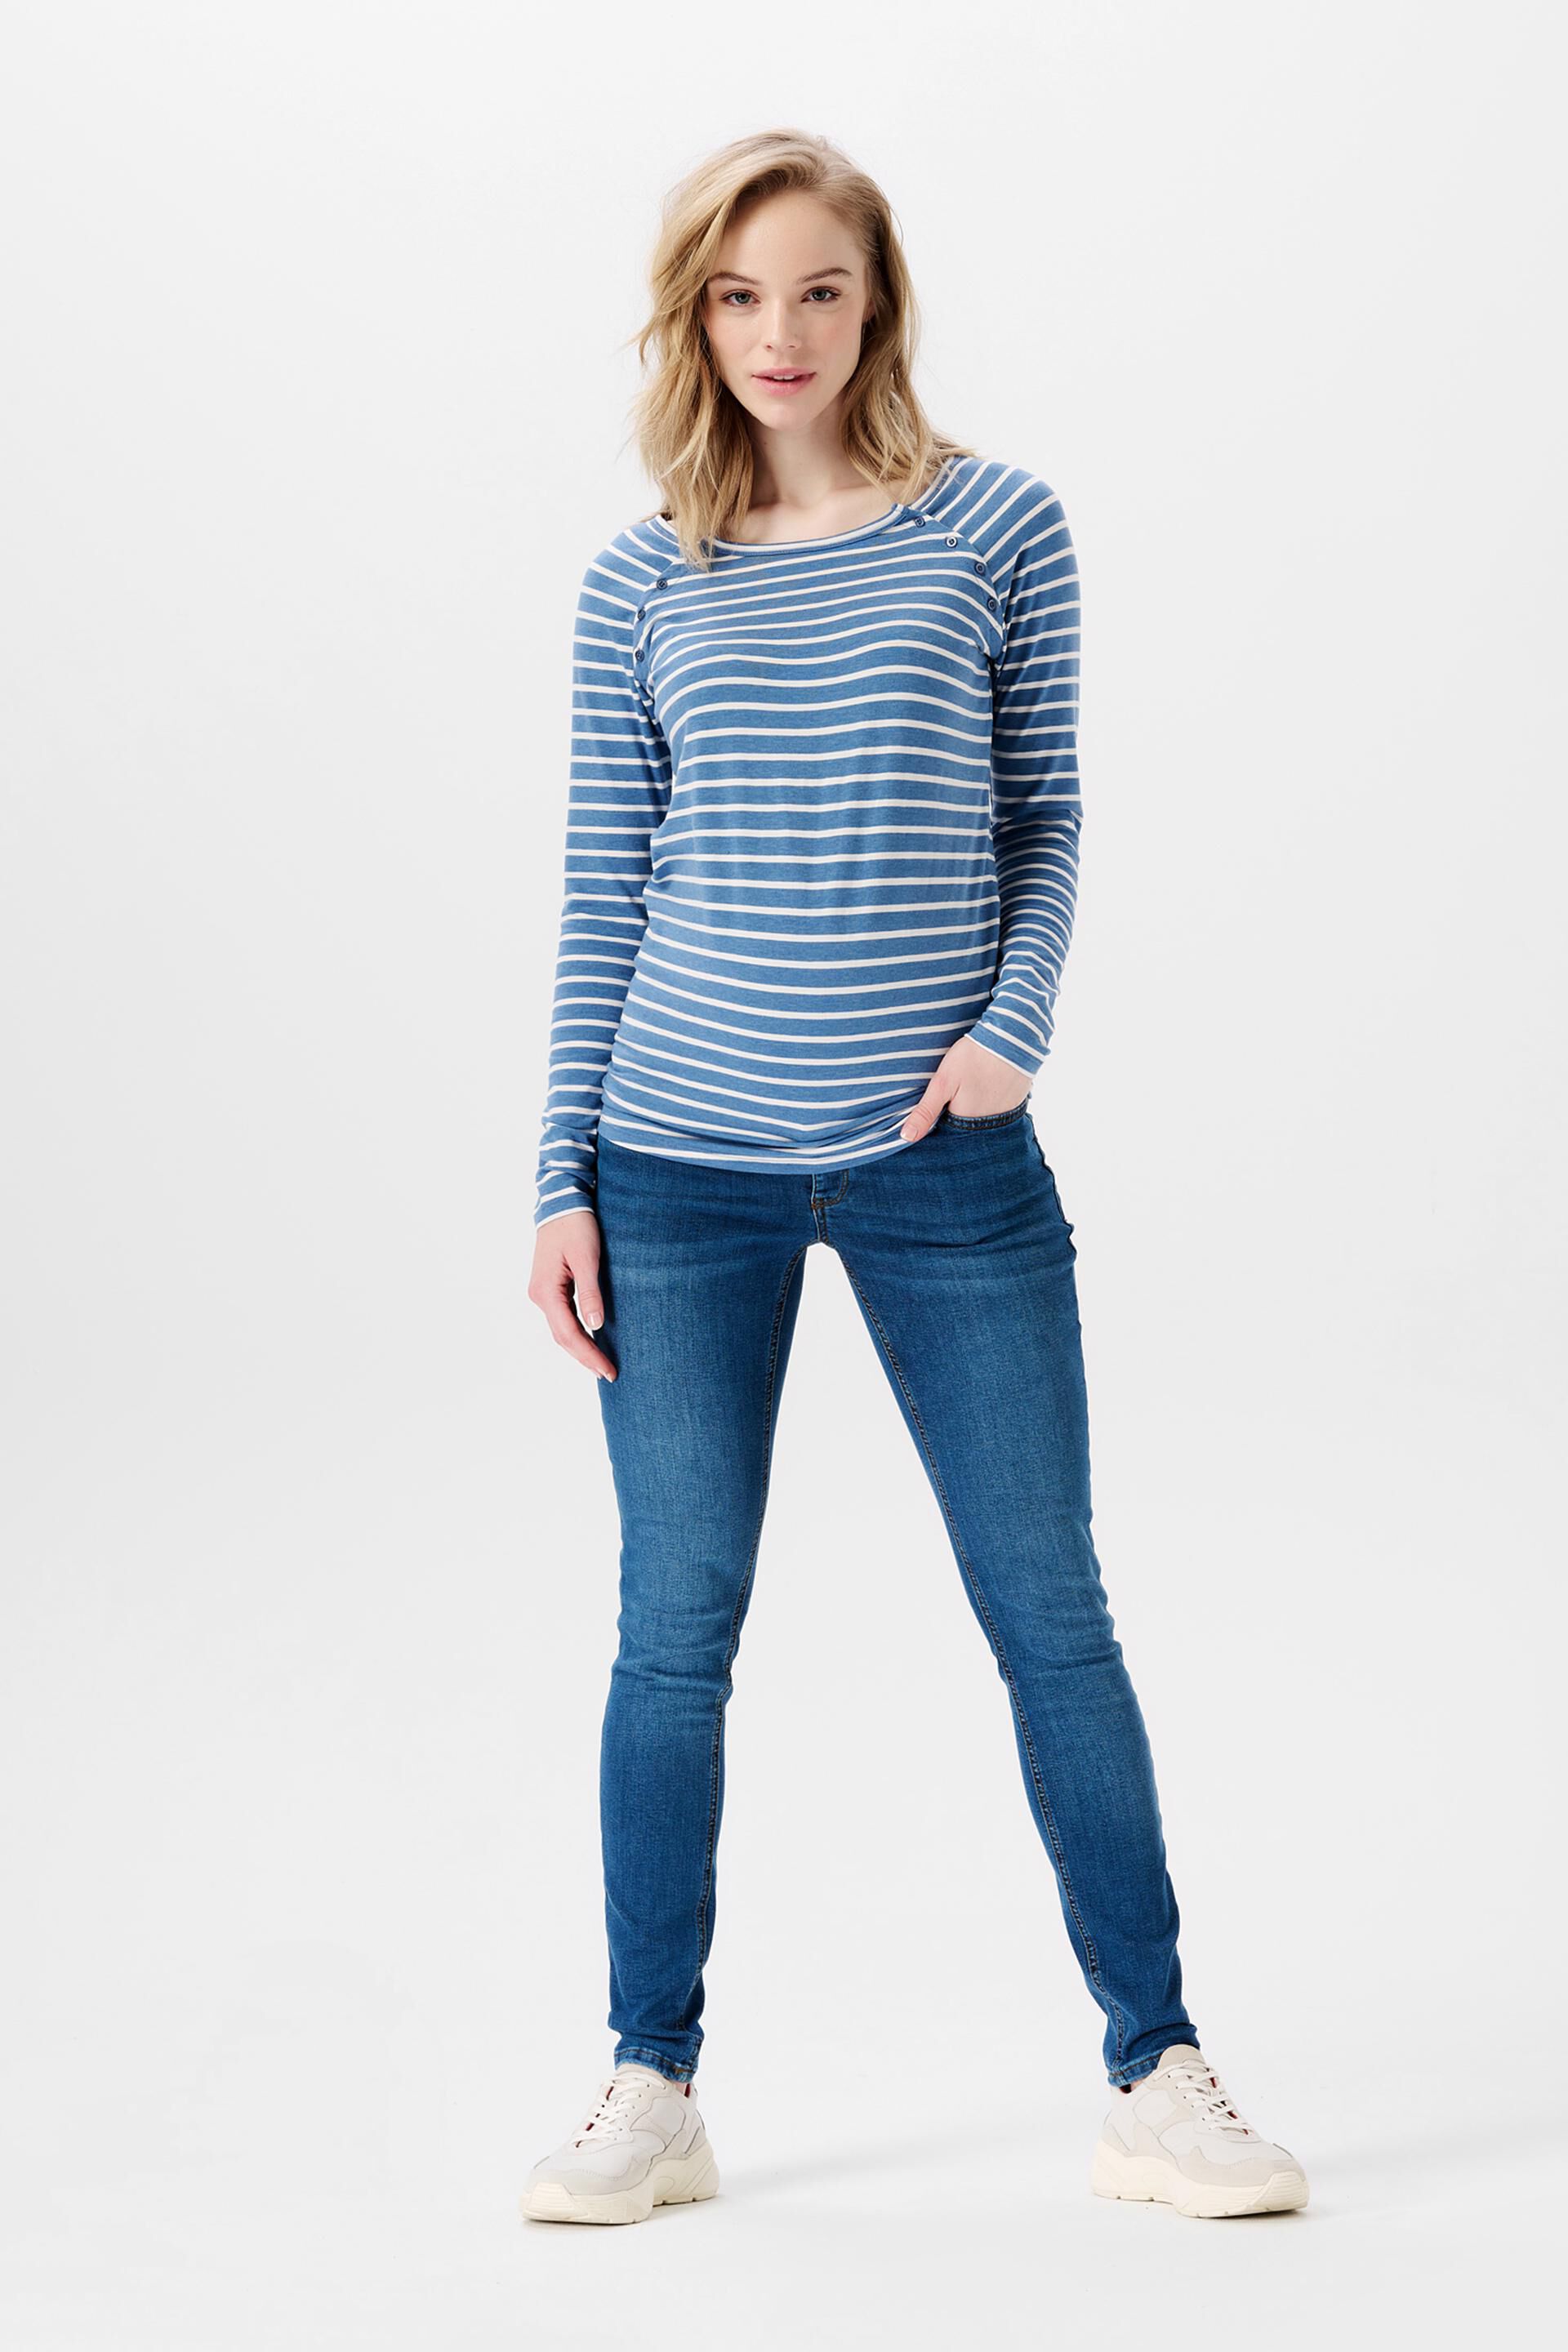 Shop Esprit Skinny fit jeans with over-the-bump waistband